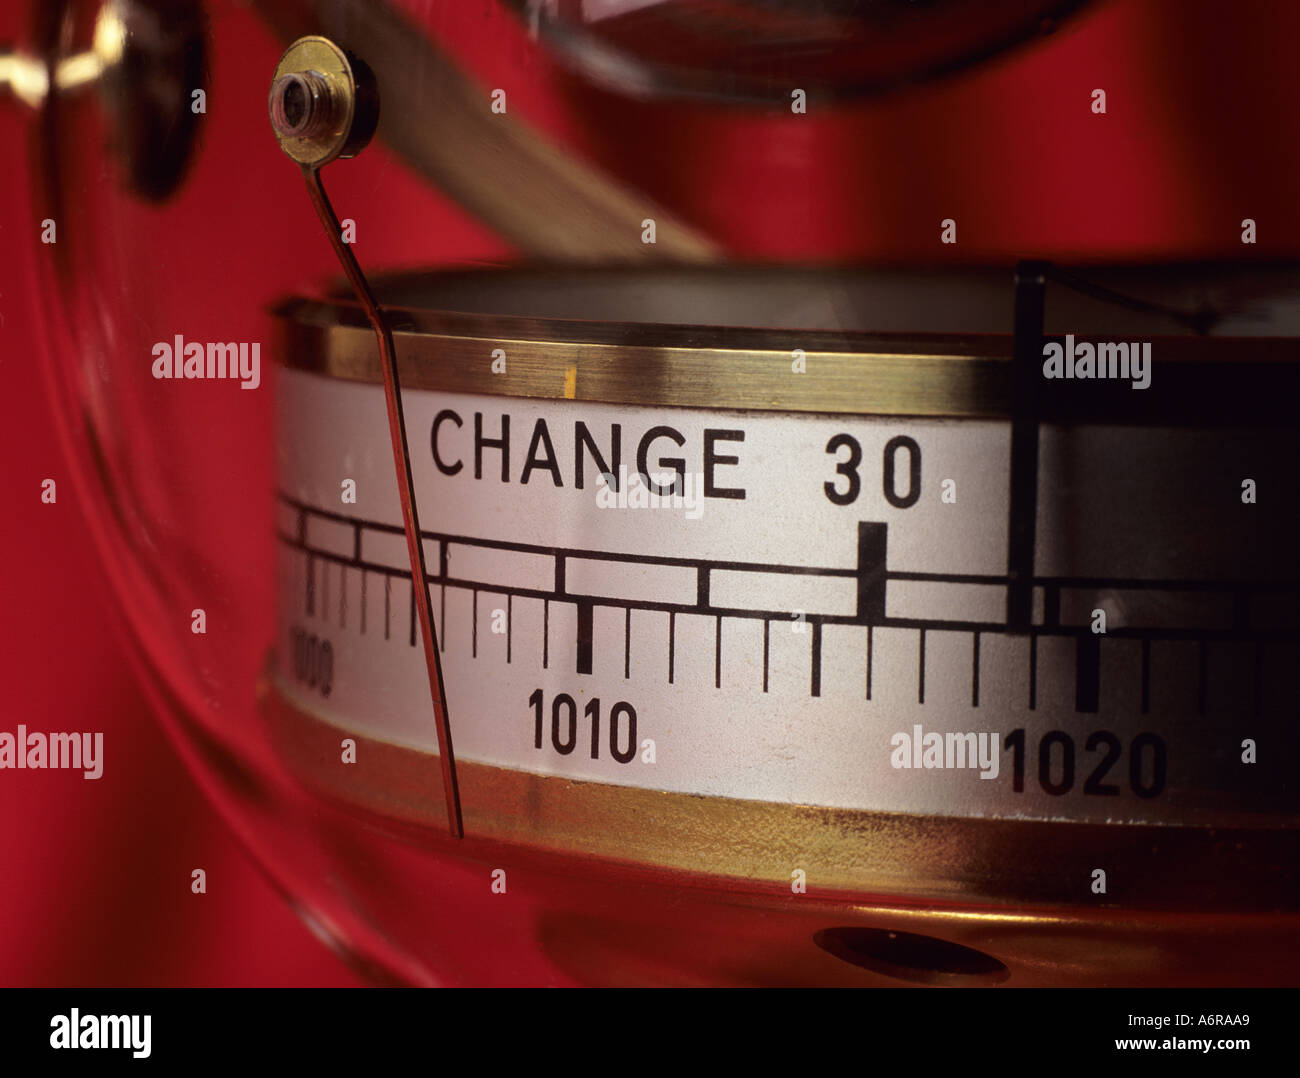 Aneroid barometer needle pointing to indicate change against a red background. UK Britain Stock Photo